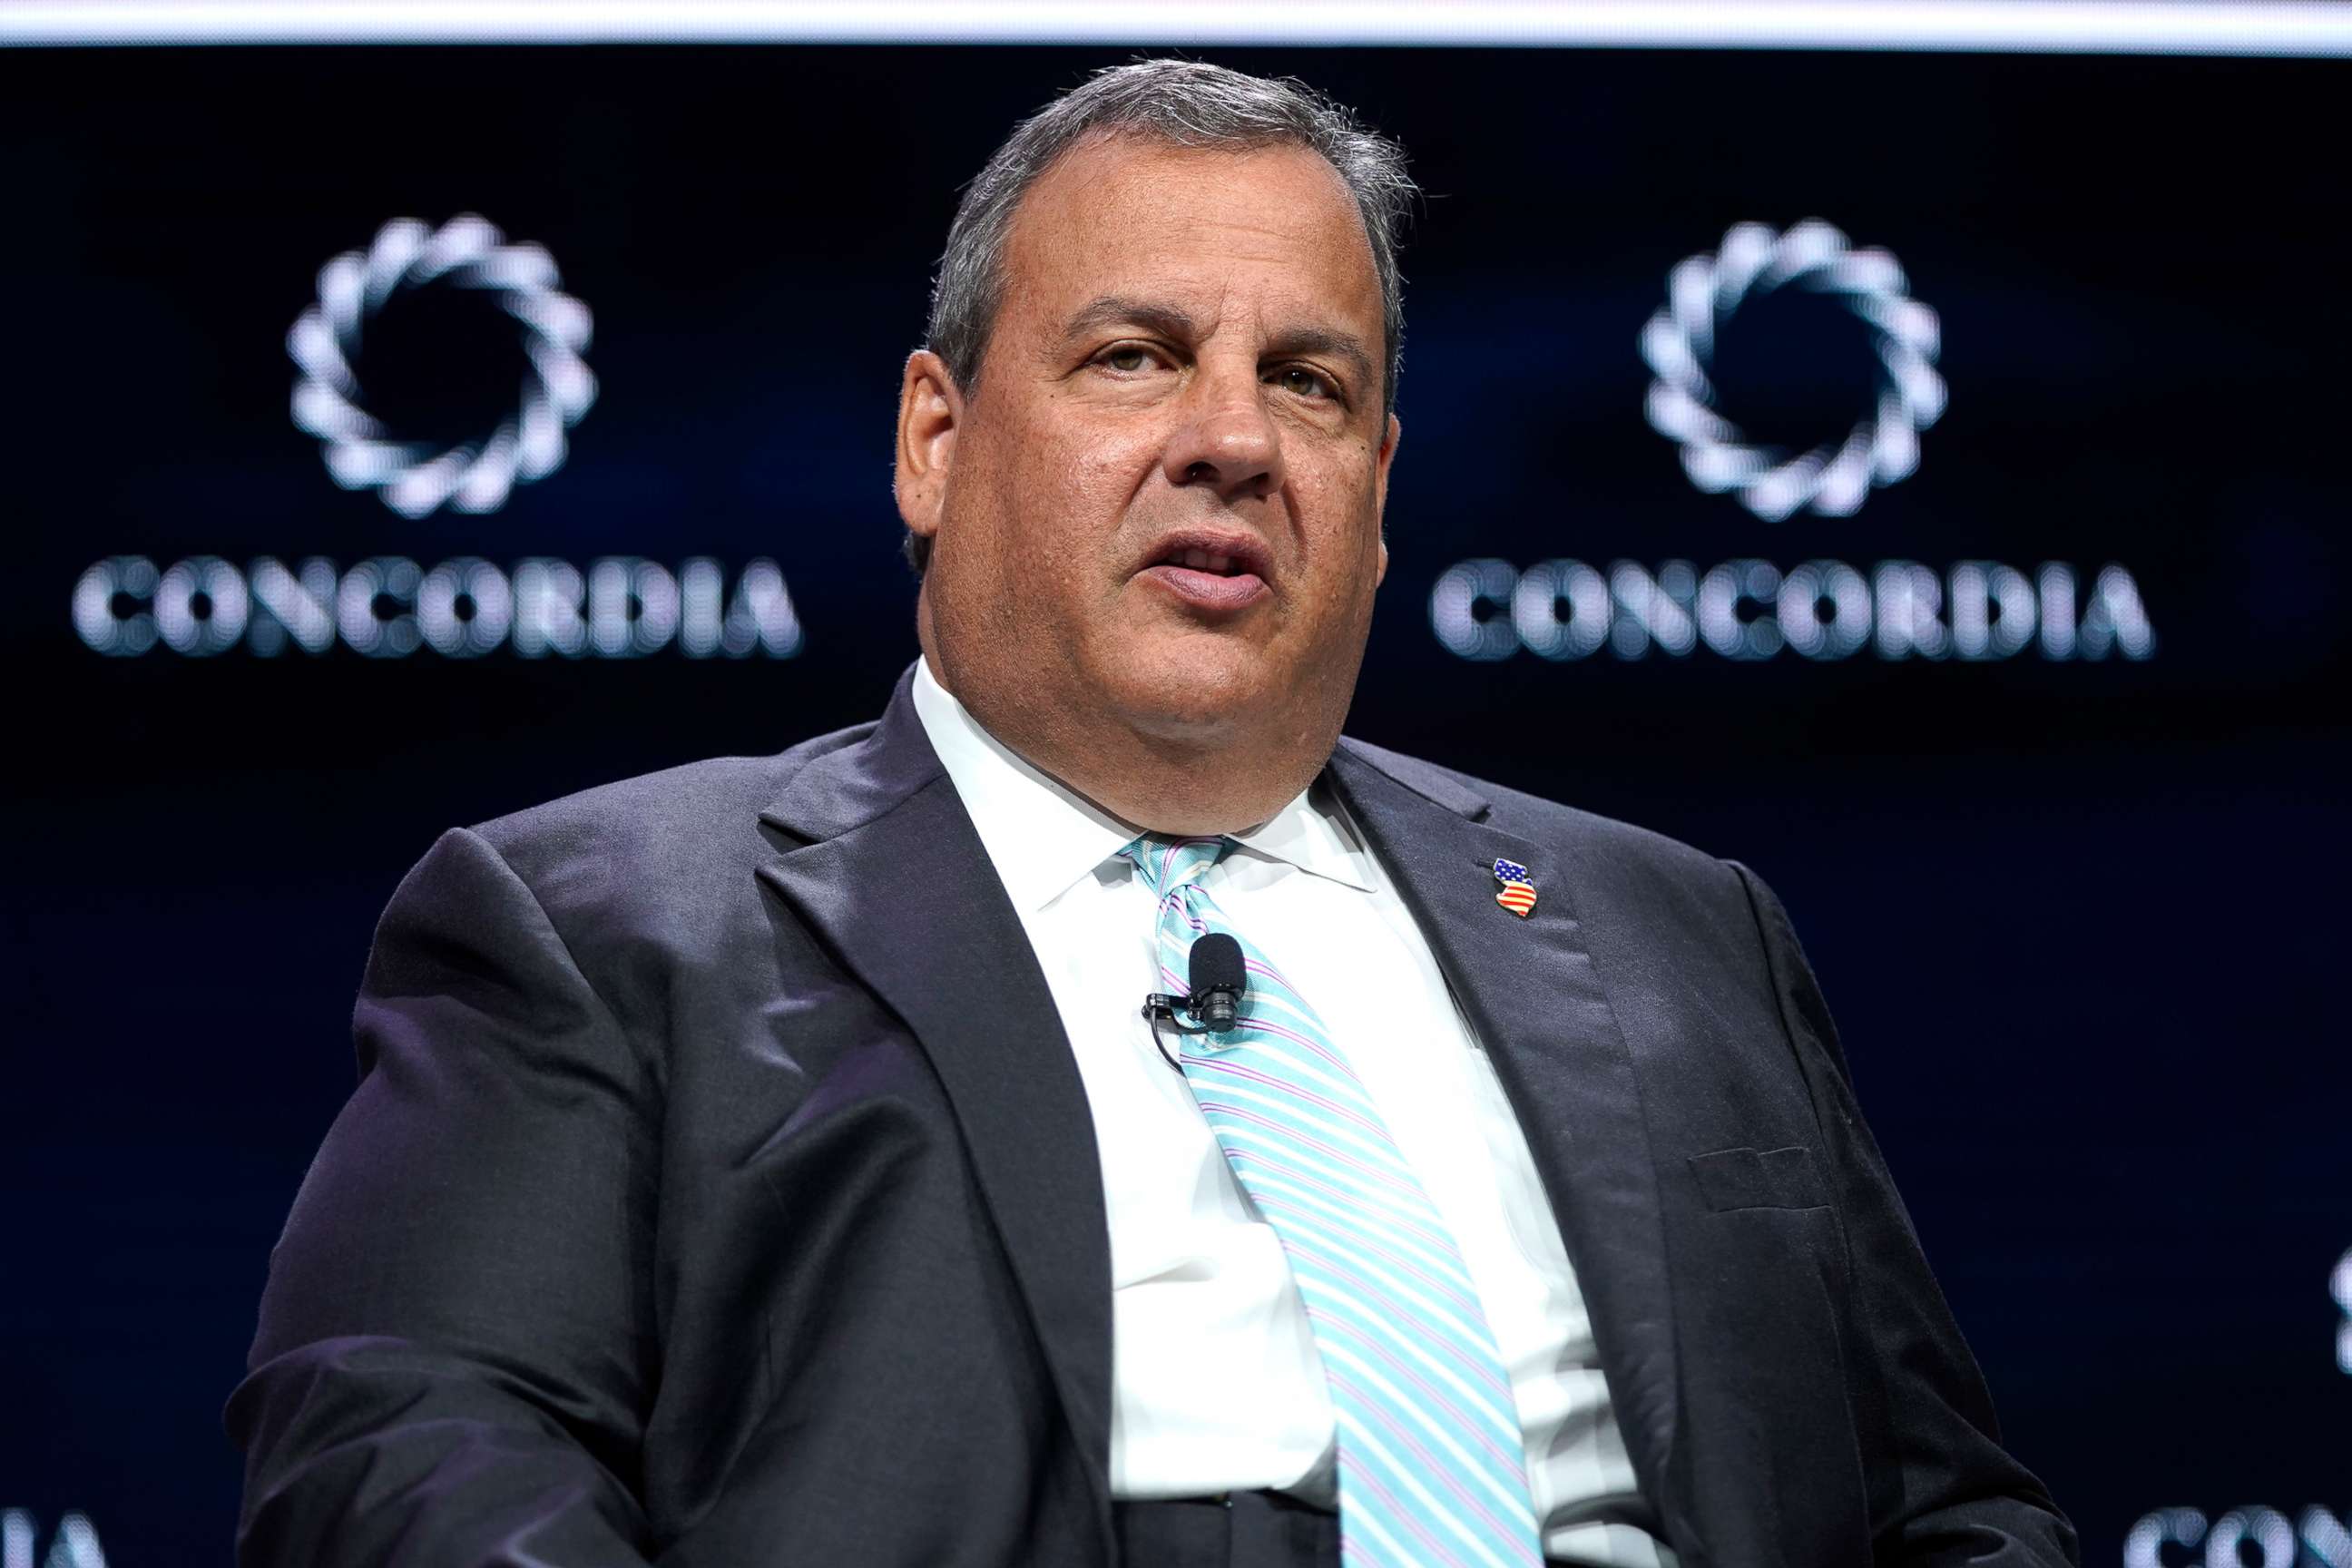 PHOTO: Former New Jersey Gov. Chris Christie speaks during an event in New York, Sept. 23, 2019.